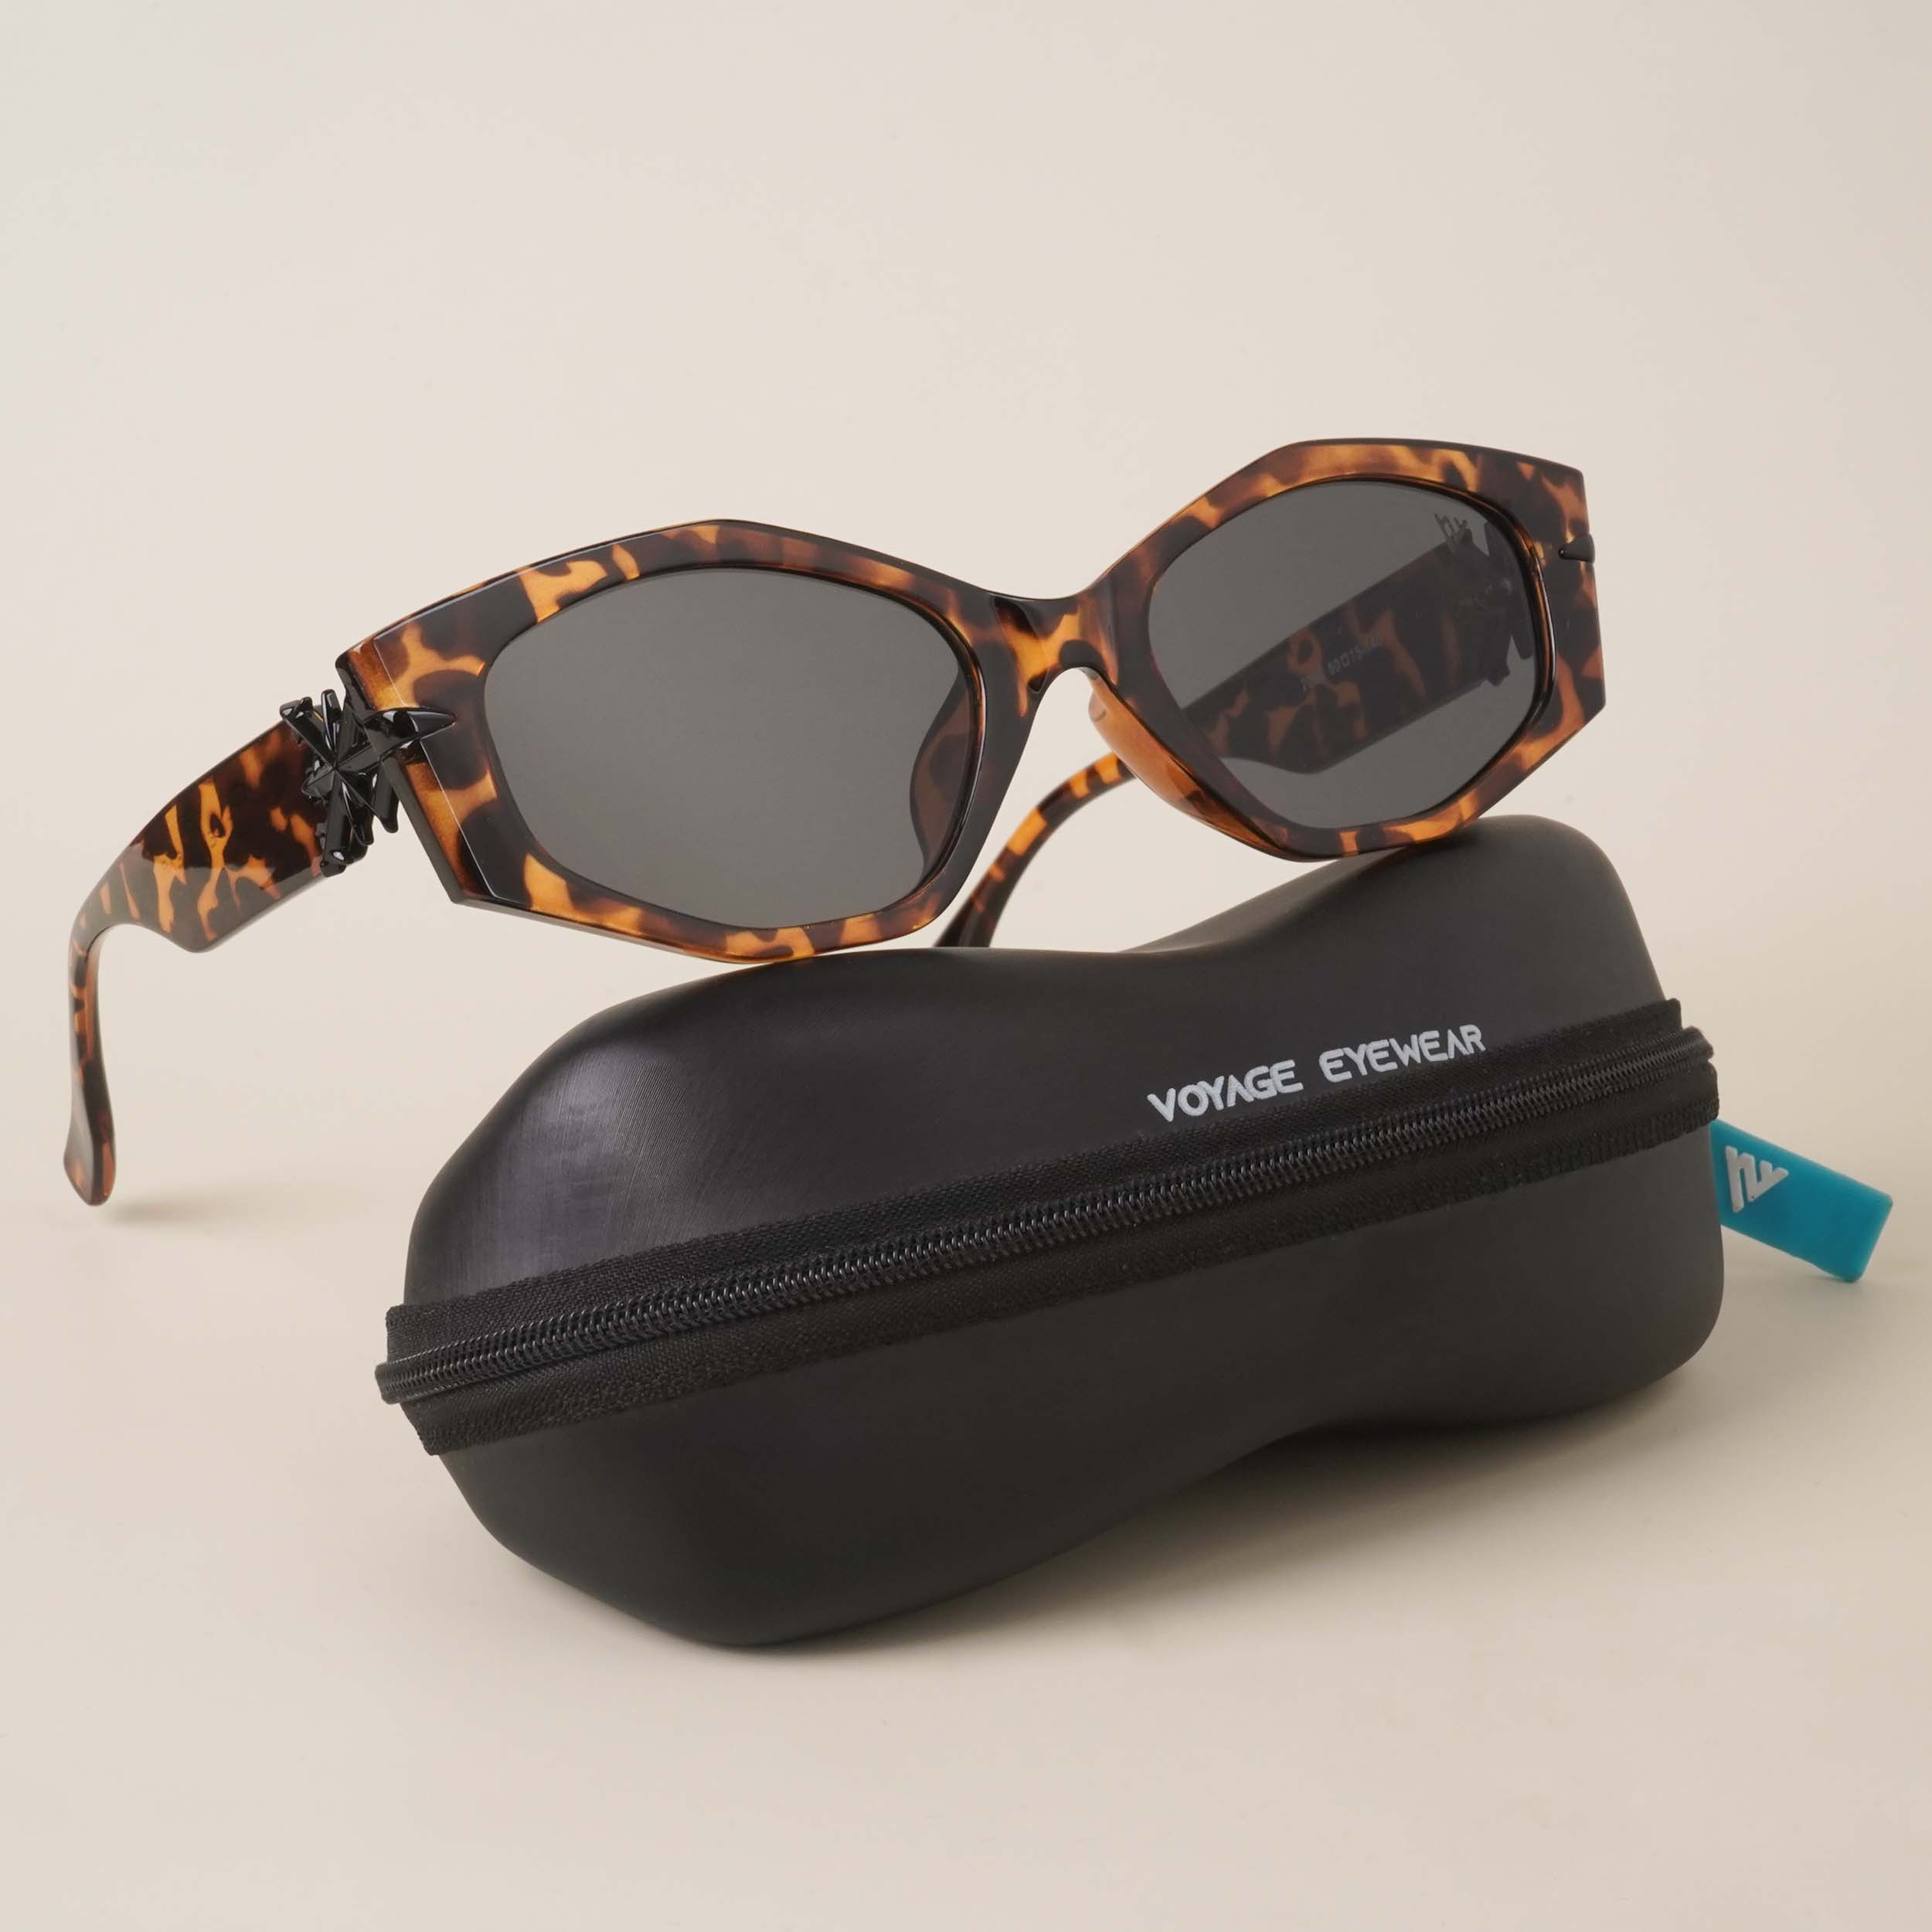 Voyage Black Oval Sunglasses for Women - MG3989